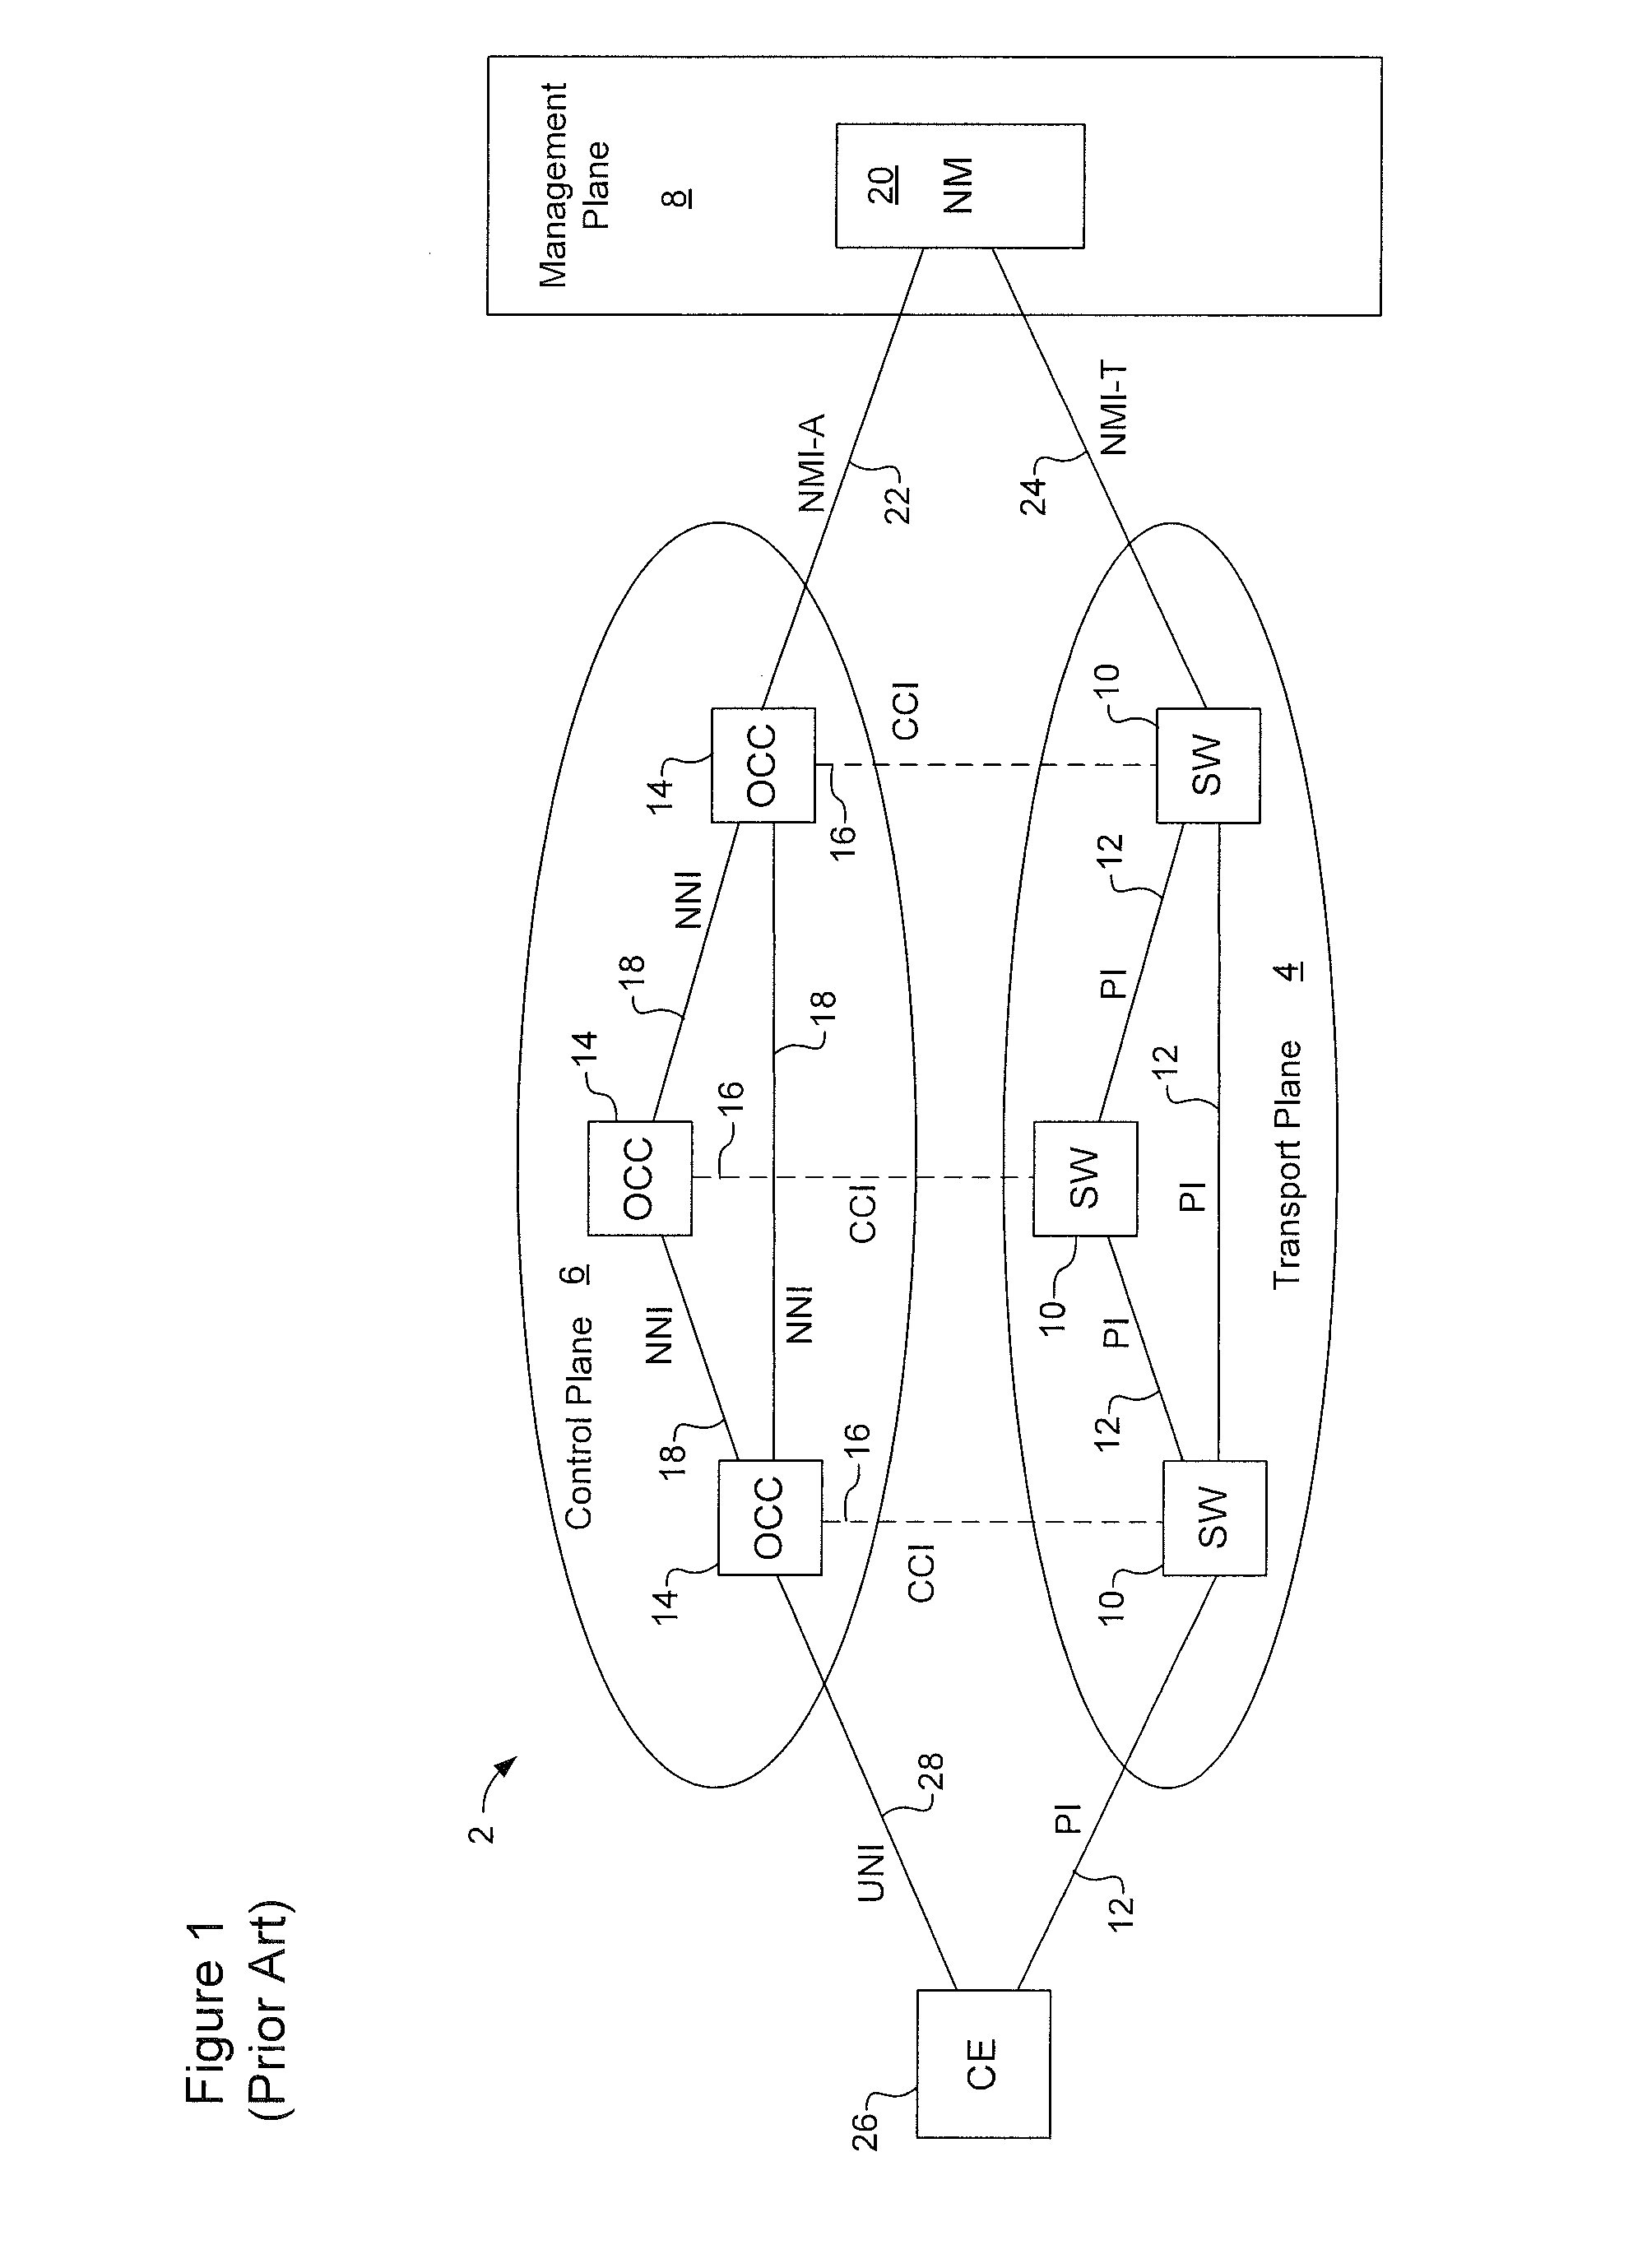 Method of network reconfiguration in optical transport networks